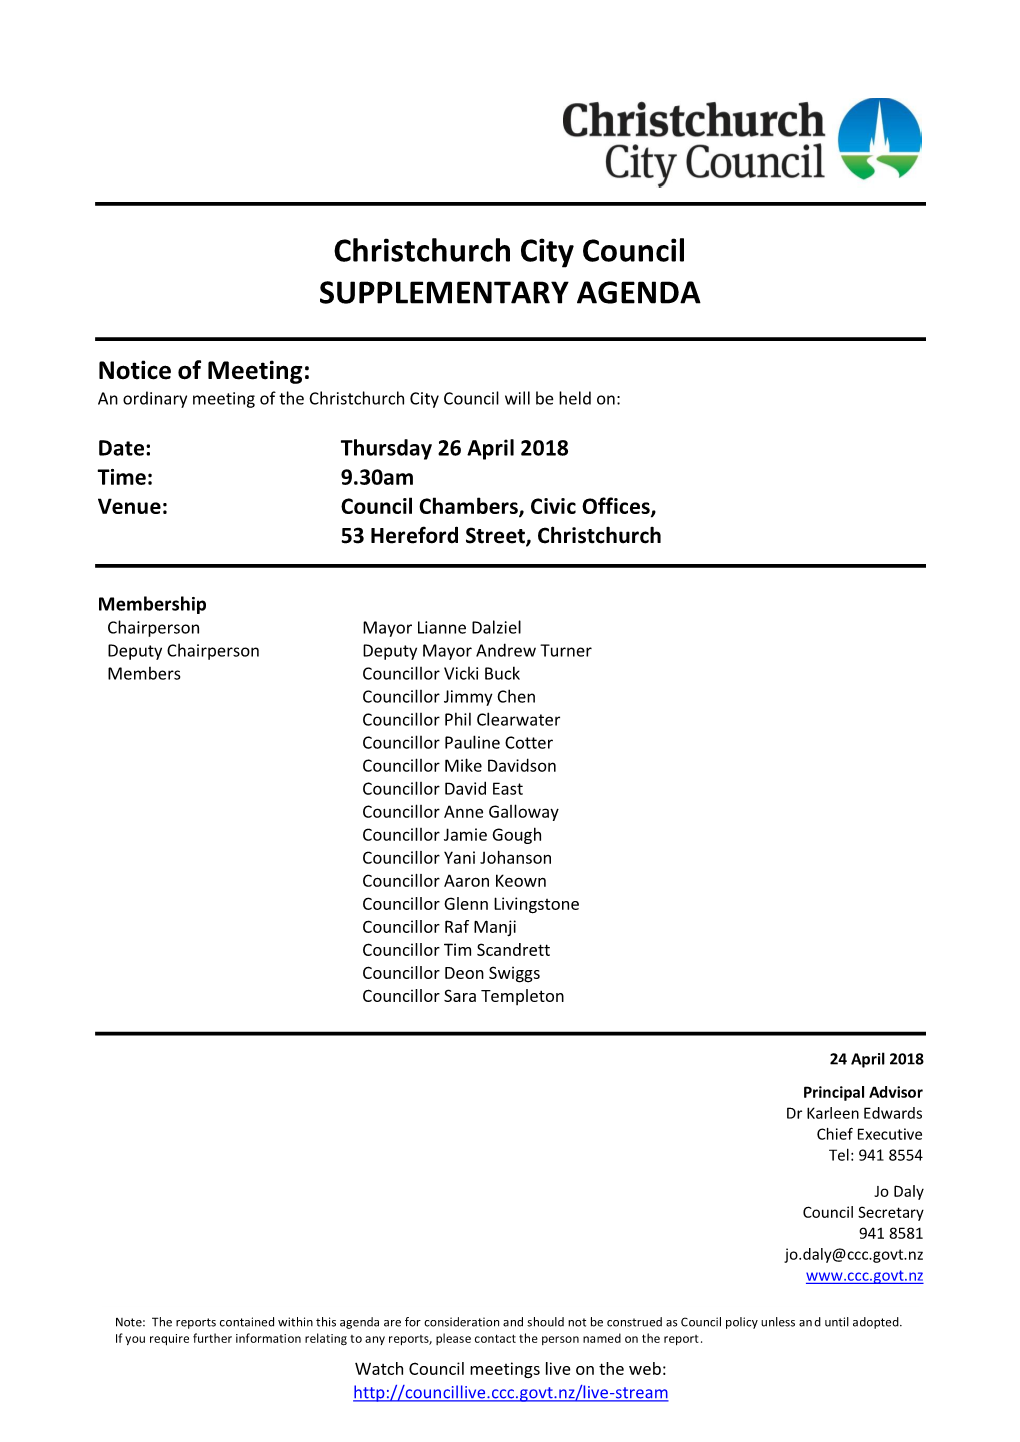 Supplementary Agenda of Council